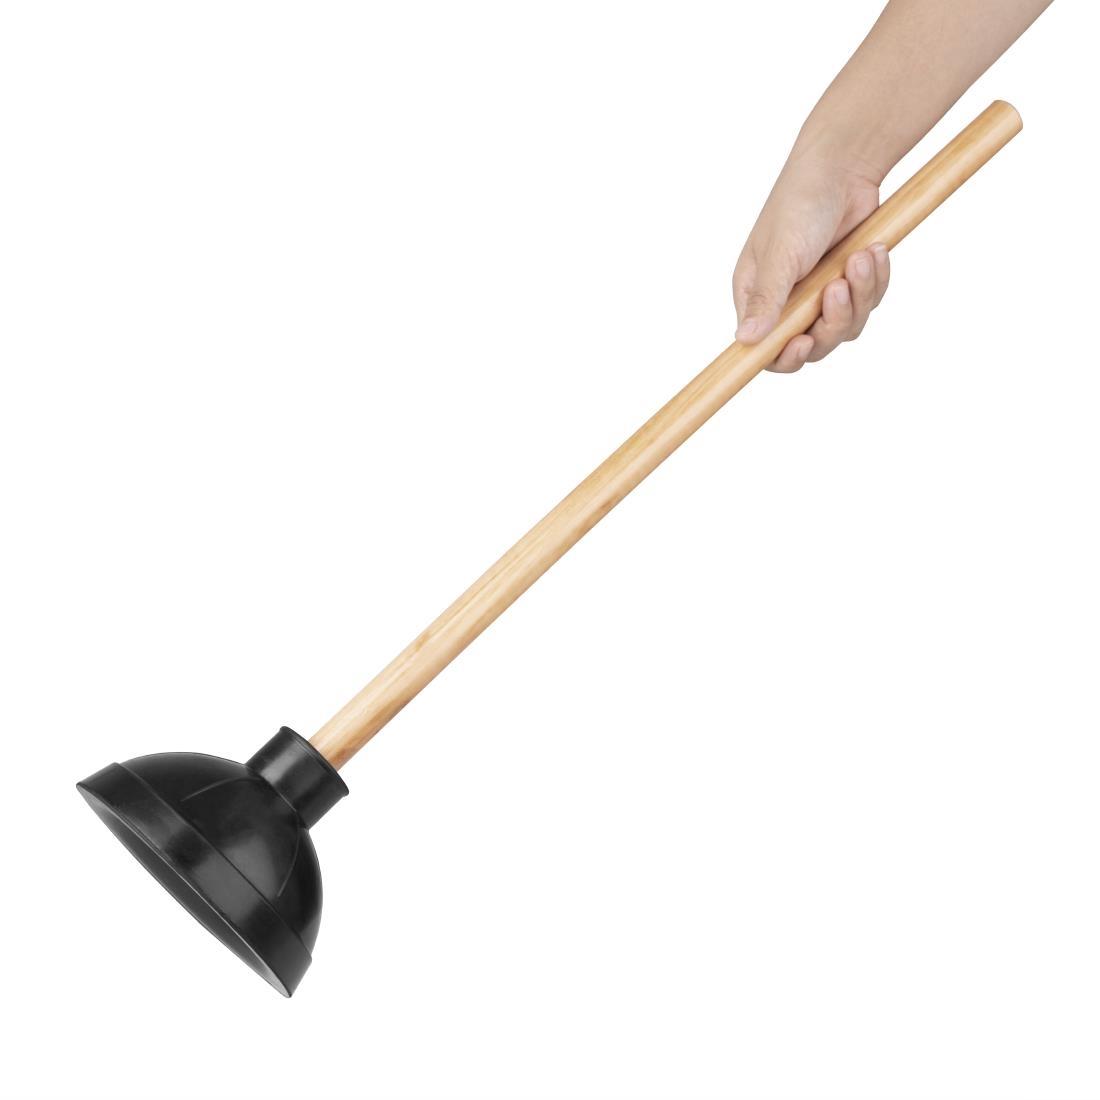 Jantex Plunger With Wooden Handle - CG047  - 5